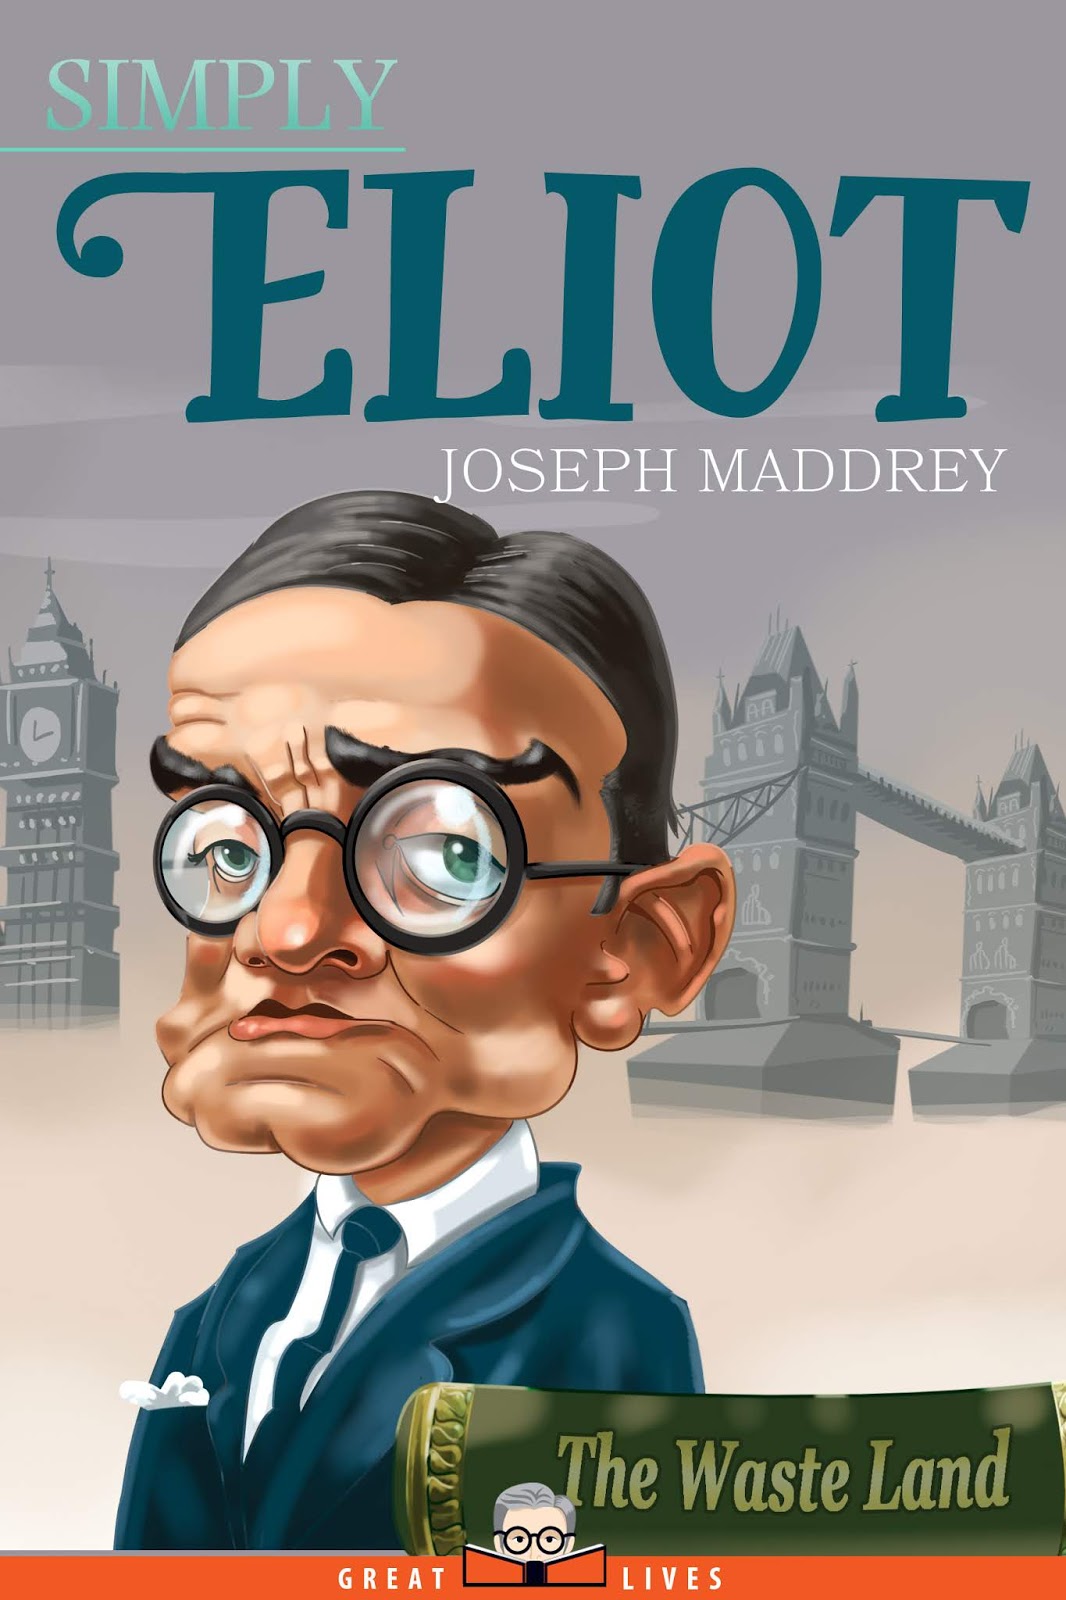 T.S. Eliot's Poetry and Plays. A Study in Sources and Meaning by